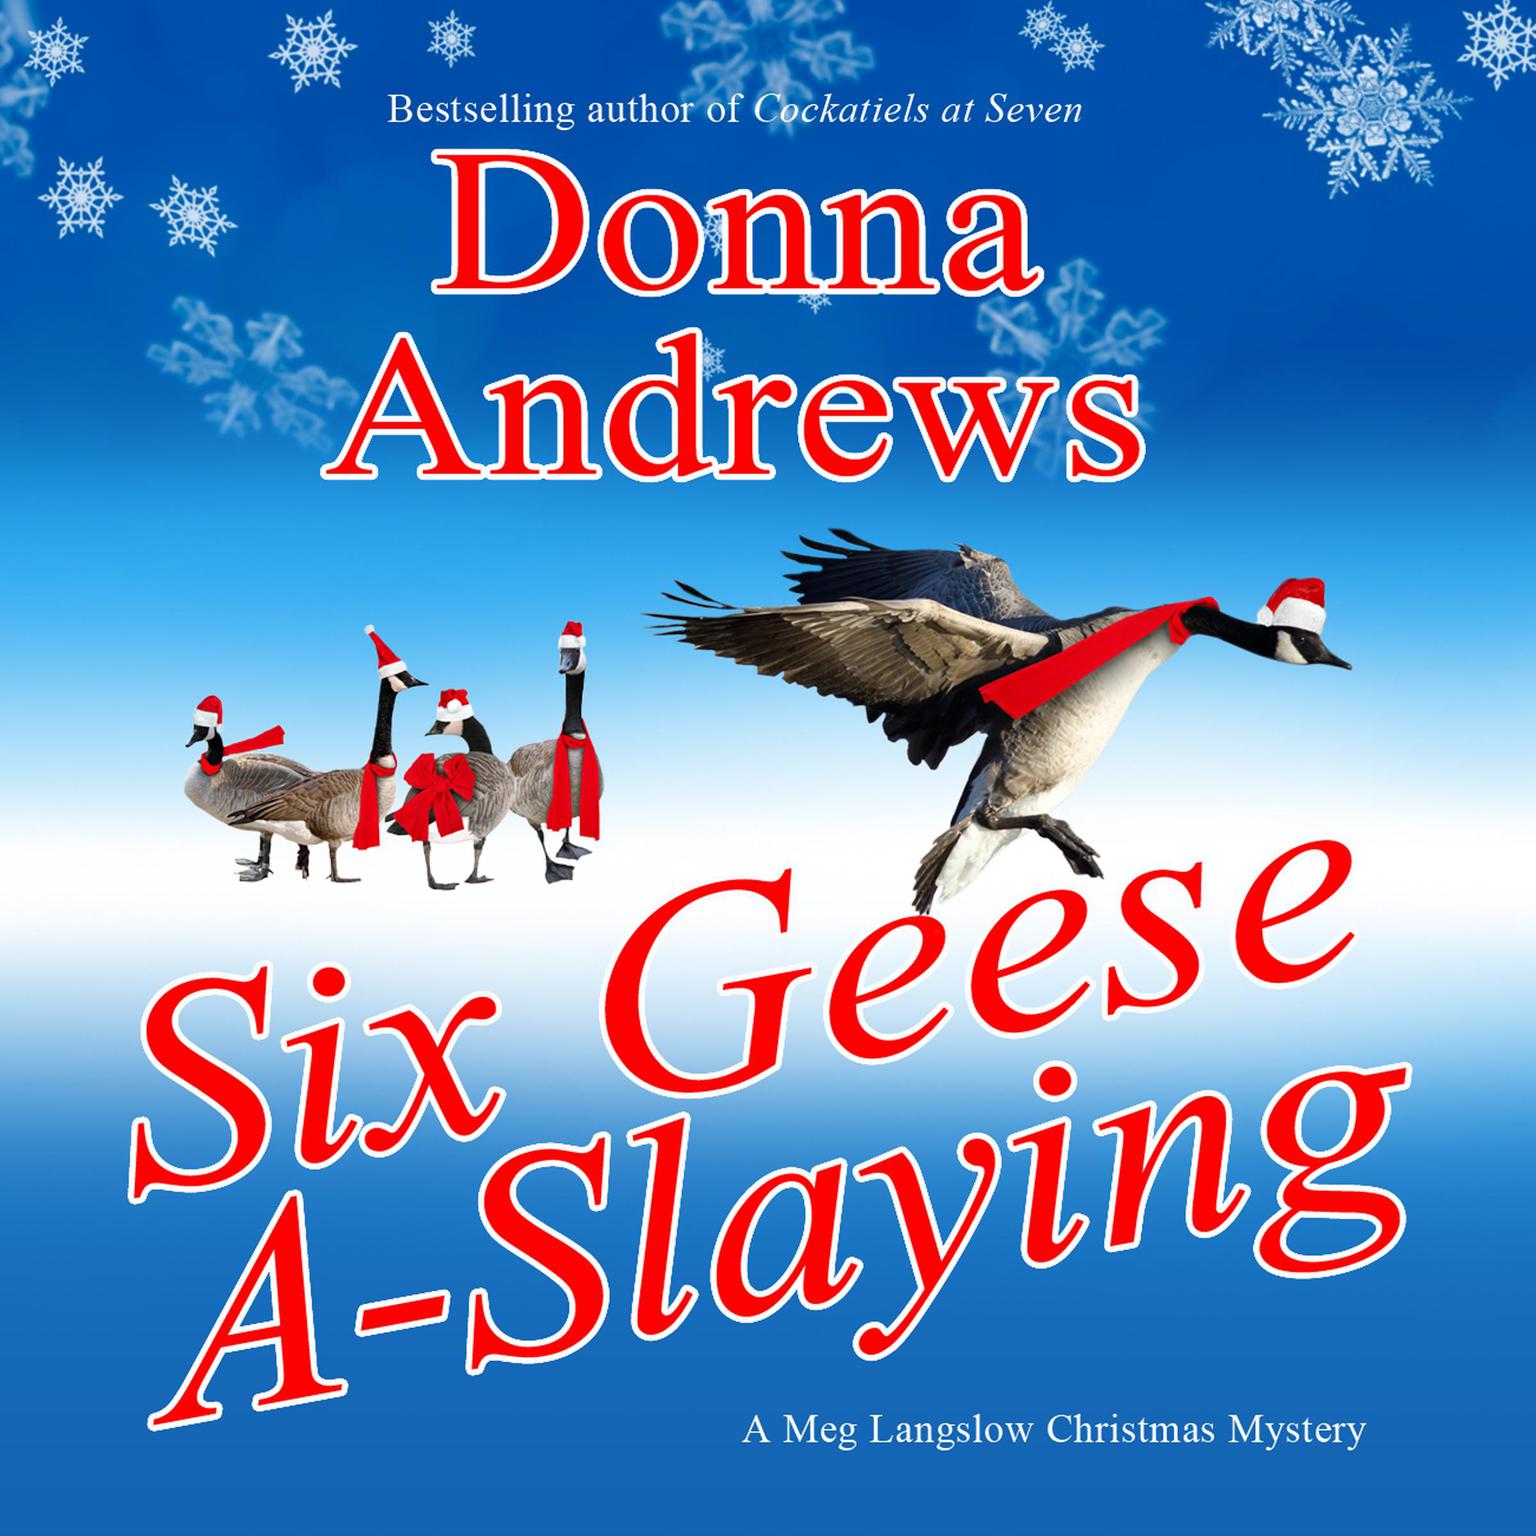 Six Geese A-Slaying Audiobook, by Donna Andrews